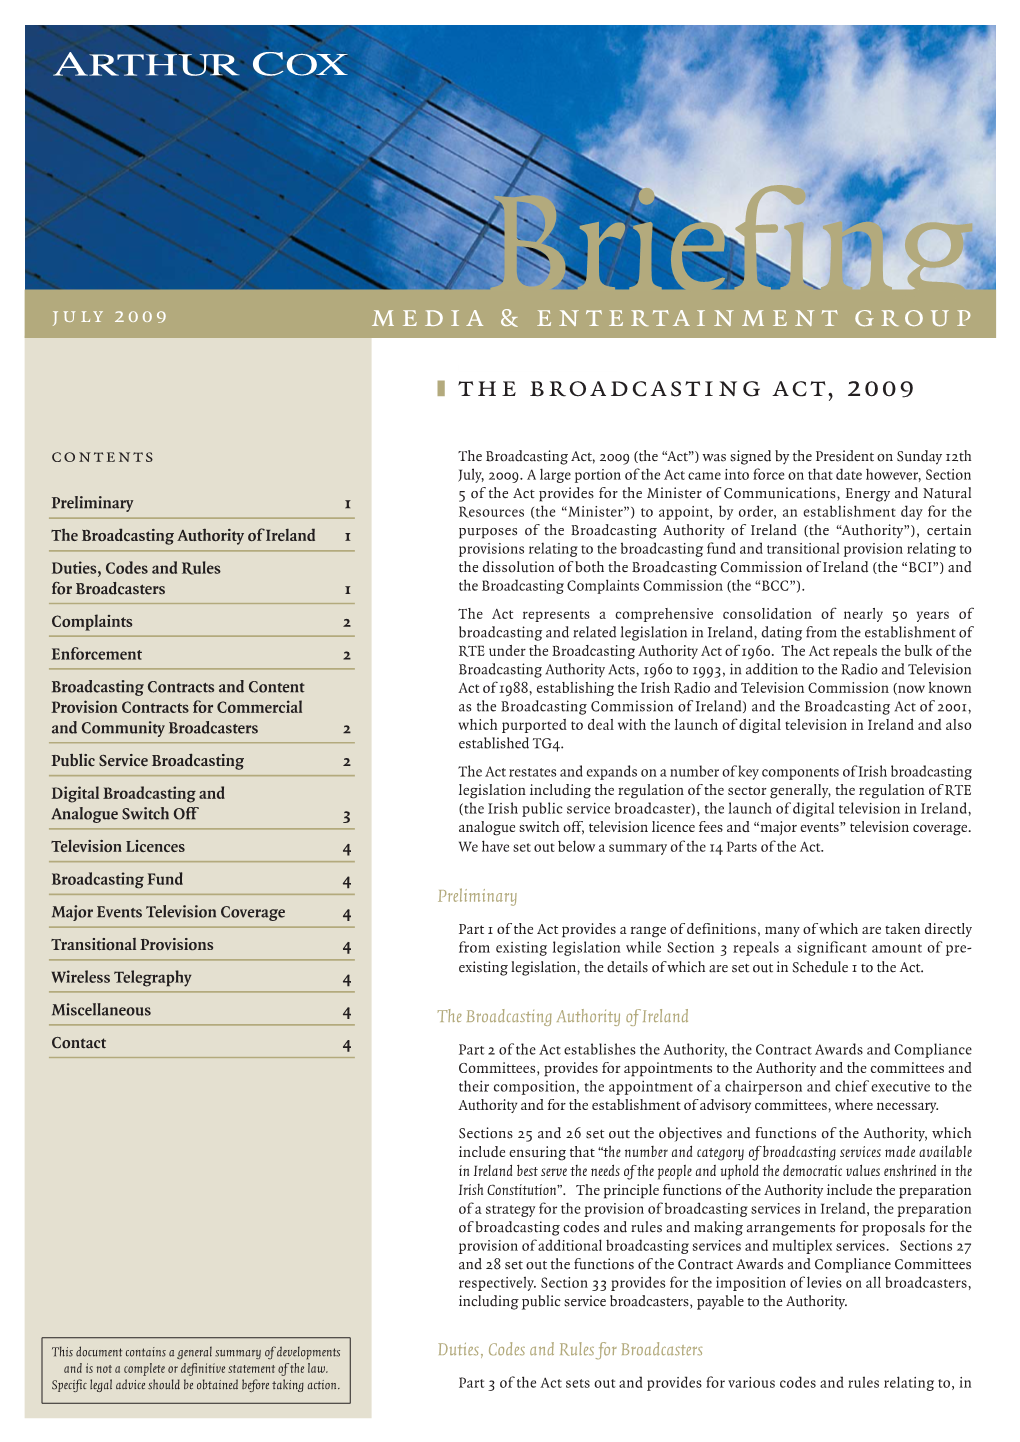 Broadcasting Act, 2009